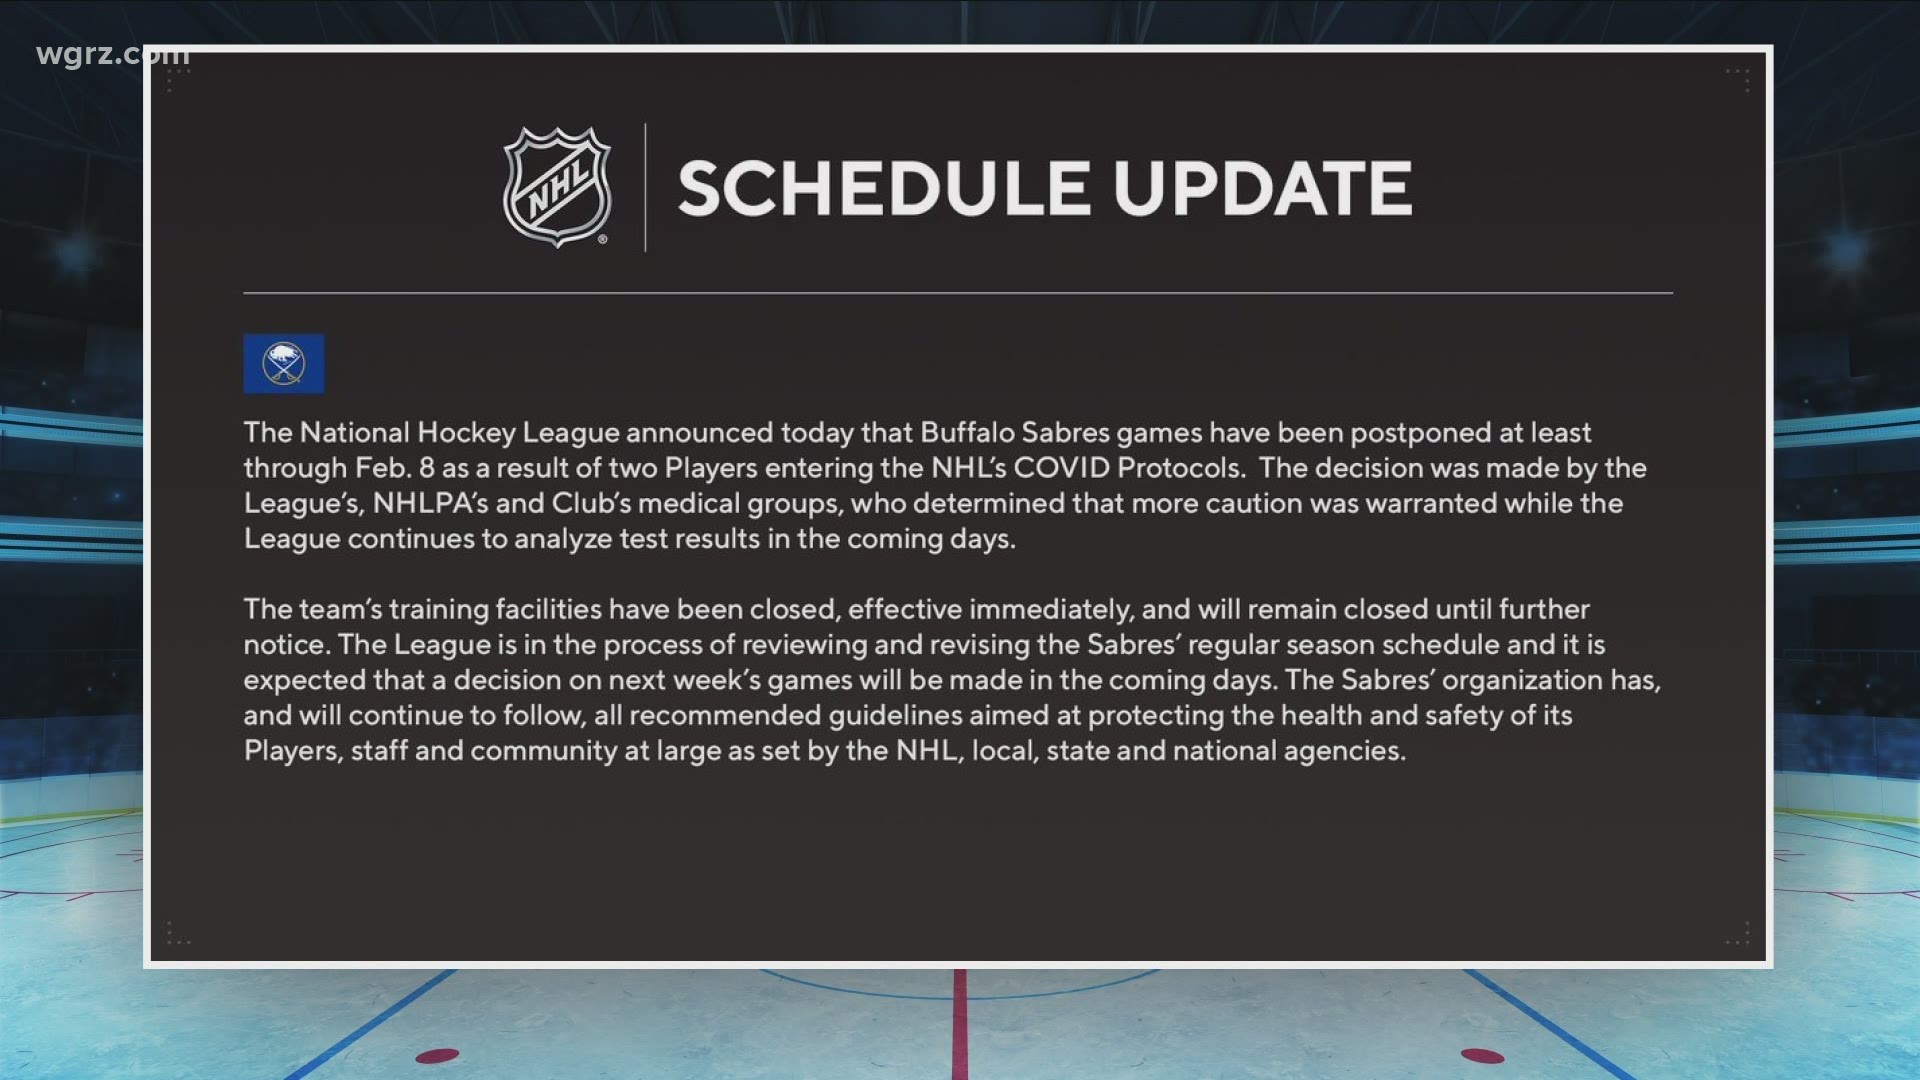 All of the Sabres' games from now through next Monday, February 8th have been postponed because two players have recently entered NHL Covid protocol.